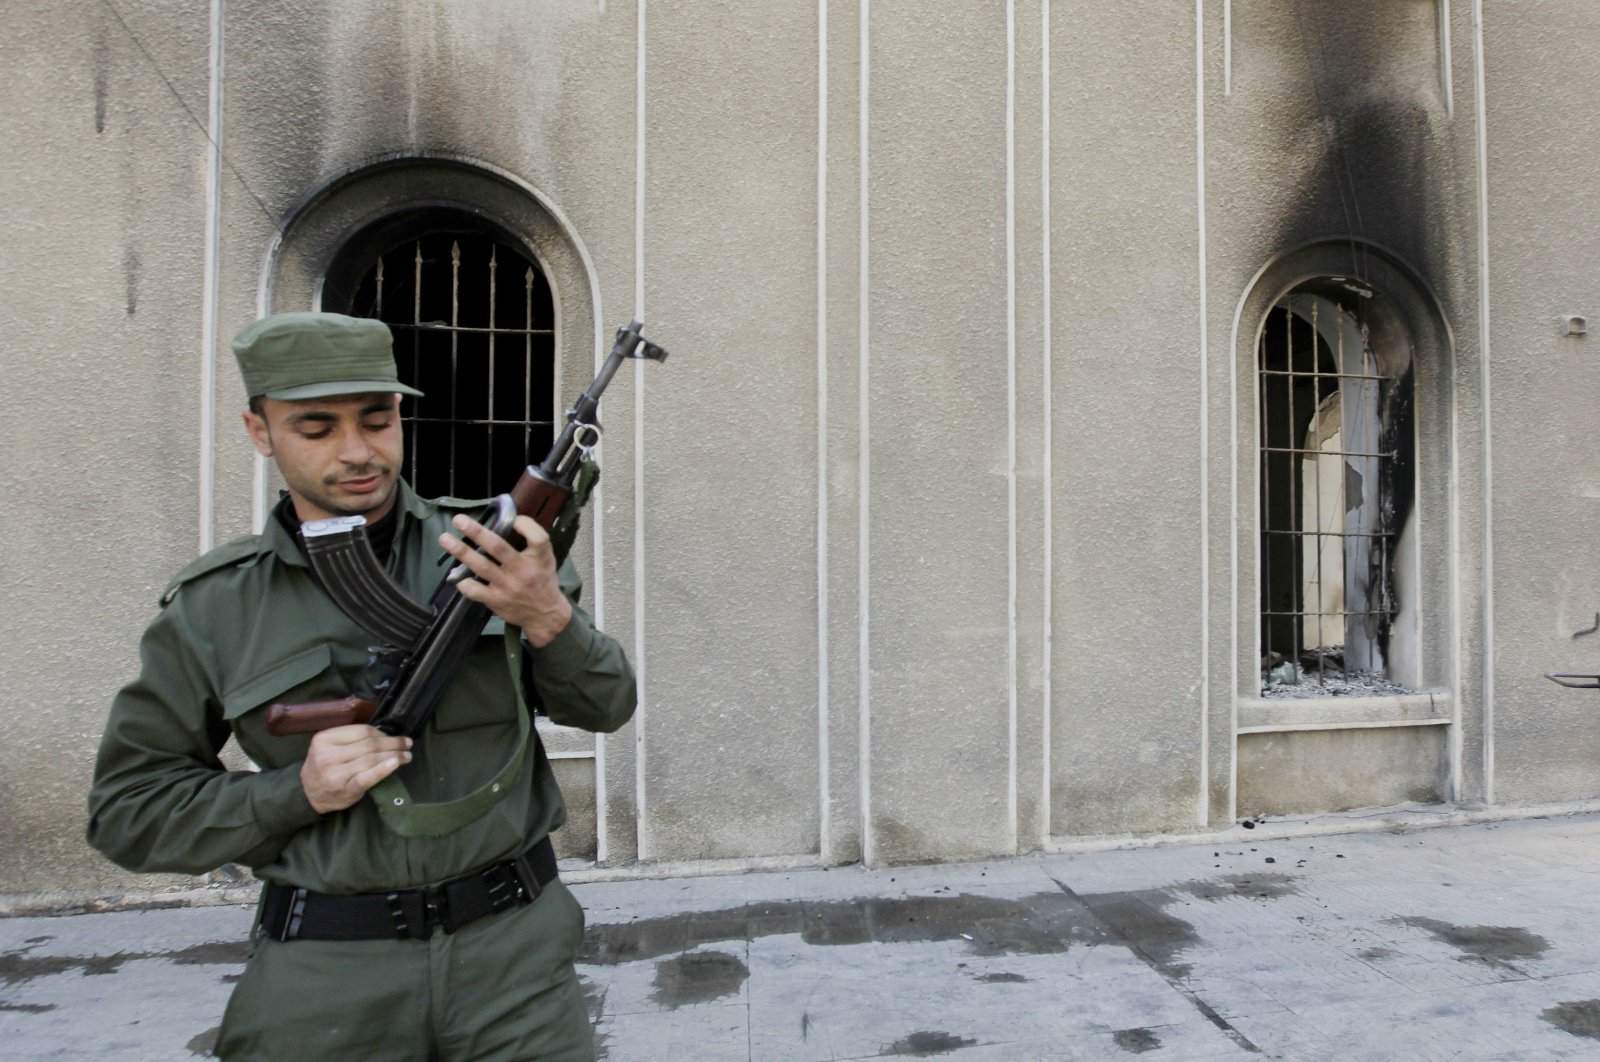 A Syrian regime soldier checks his AK-47 as he stands in front the burned court building that was set on fire by anti-regime protesters, in the southern city of Daraa, Syria, March 21, 2011. (AP Photo)